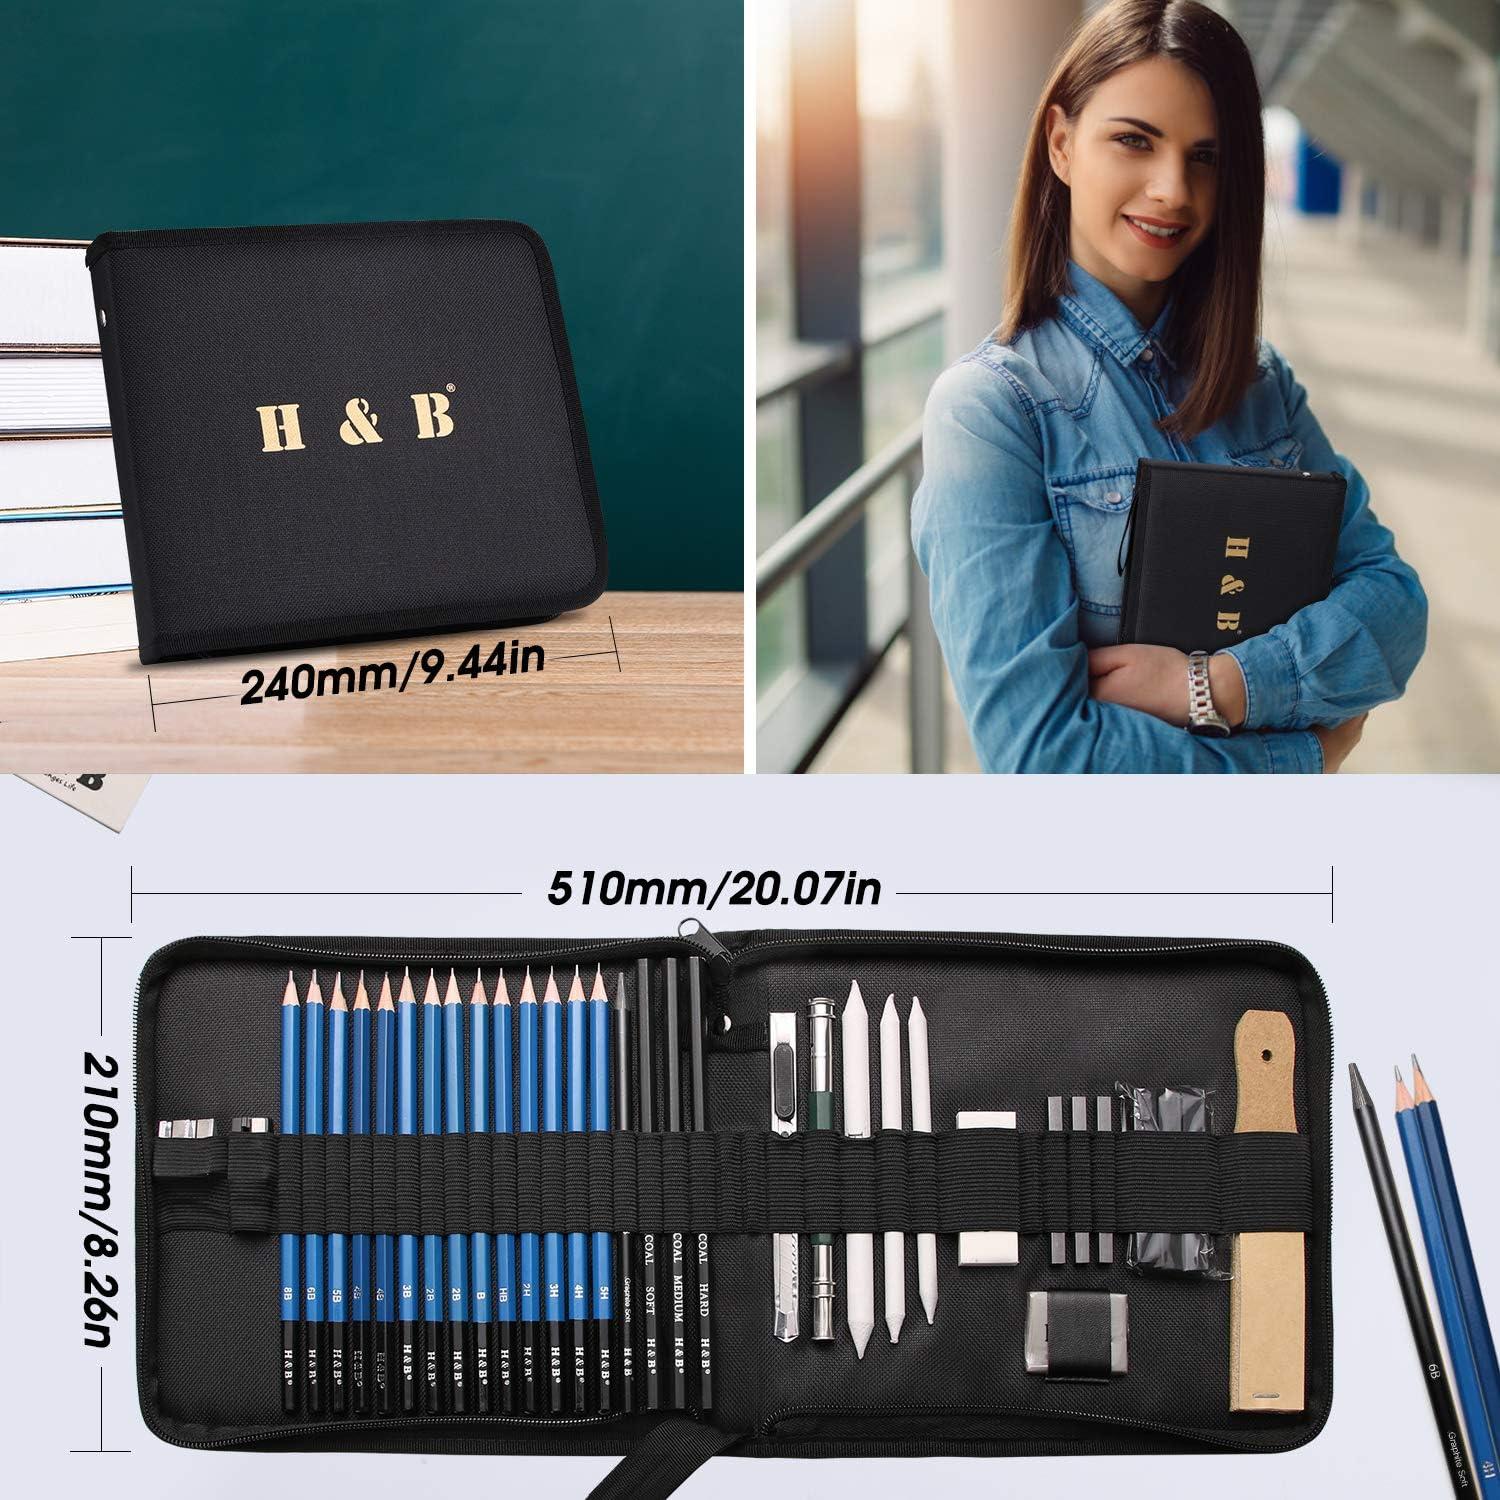 Black Wood Sketching Pencil Shading 35 Pcs Sketching And Drawing Pencil  Kit, Packaging Size: 20 X 10 X 5 Centimeters